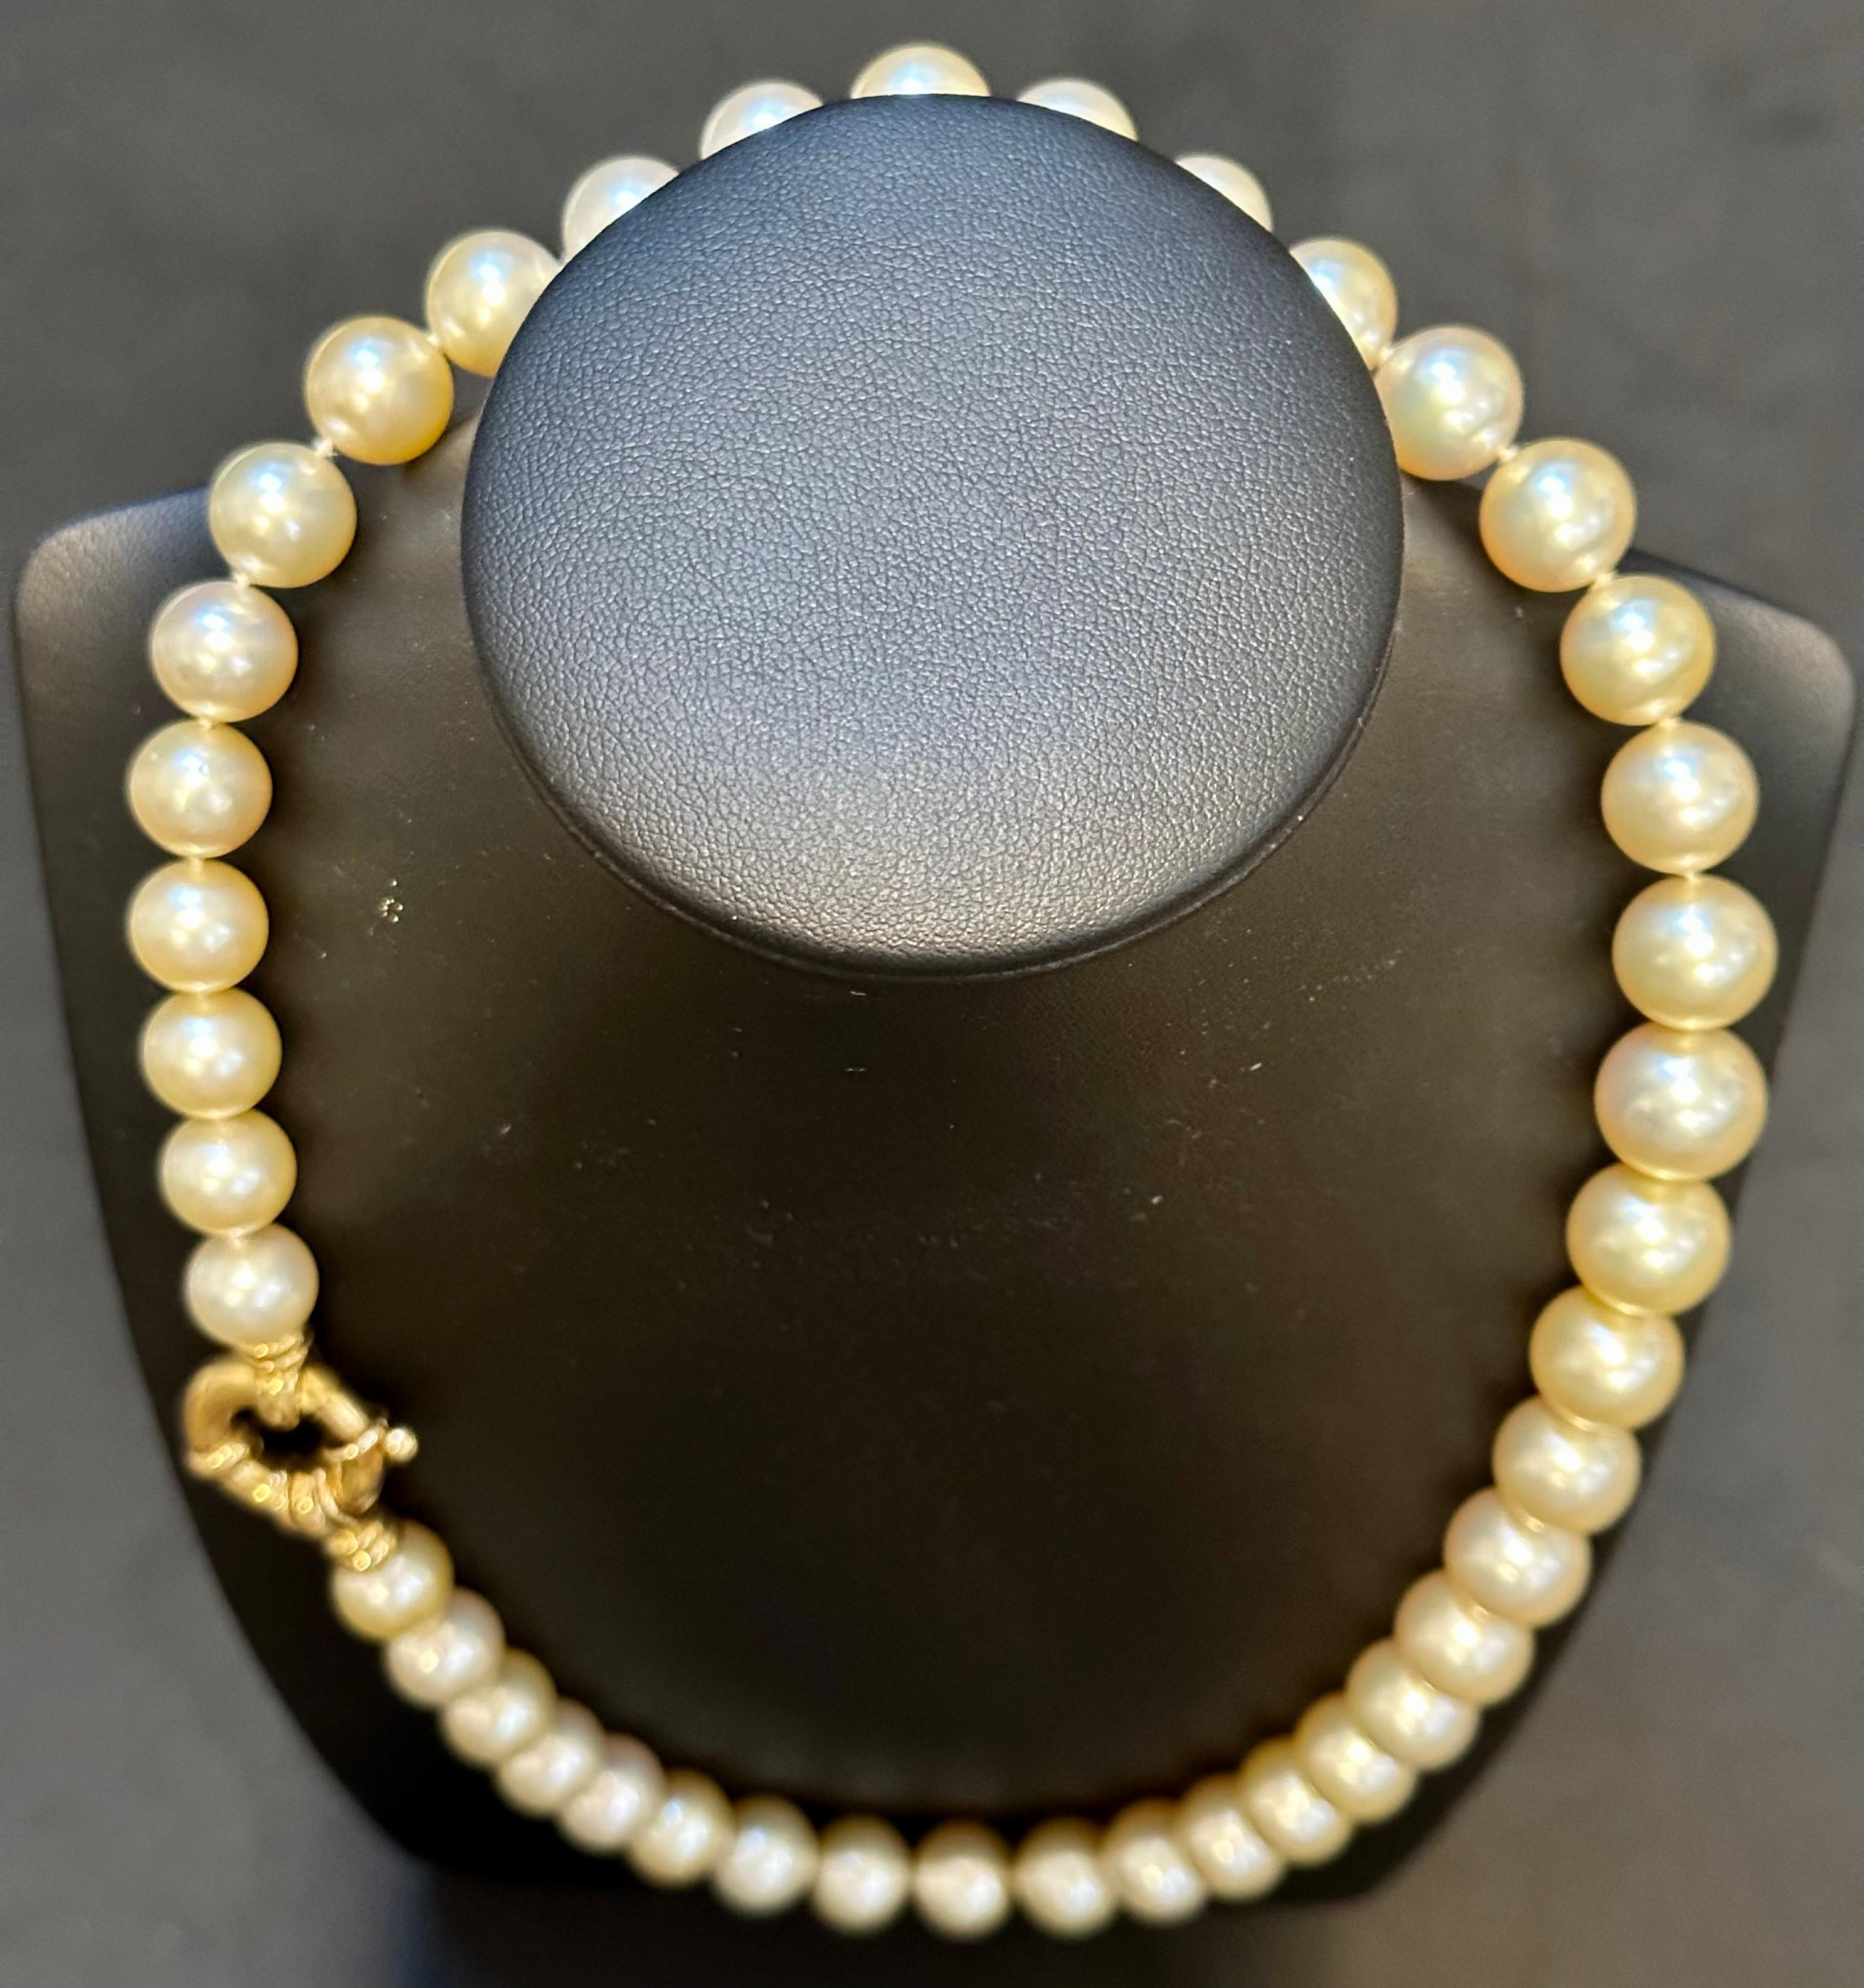 Round Cut Golden South Sea Pearls 10-12 MM Strand Necklace 18 Kt Gold  Clasp 18